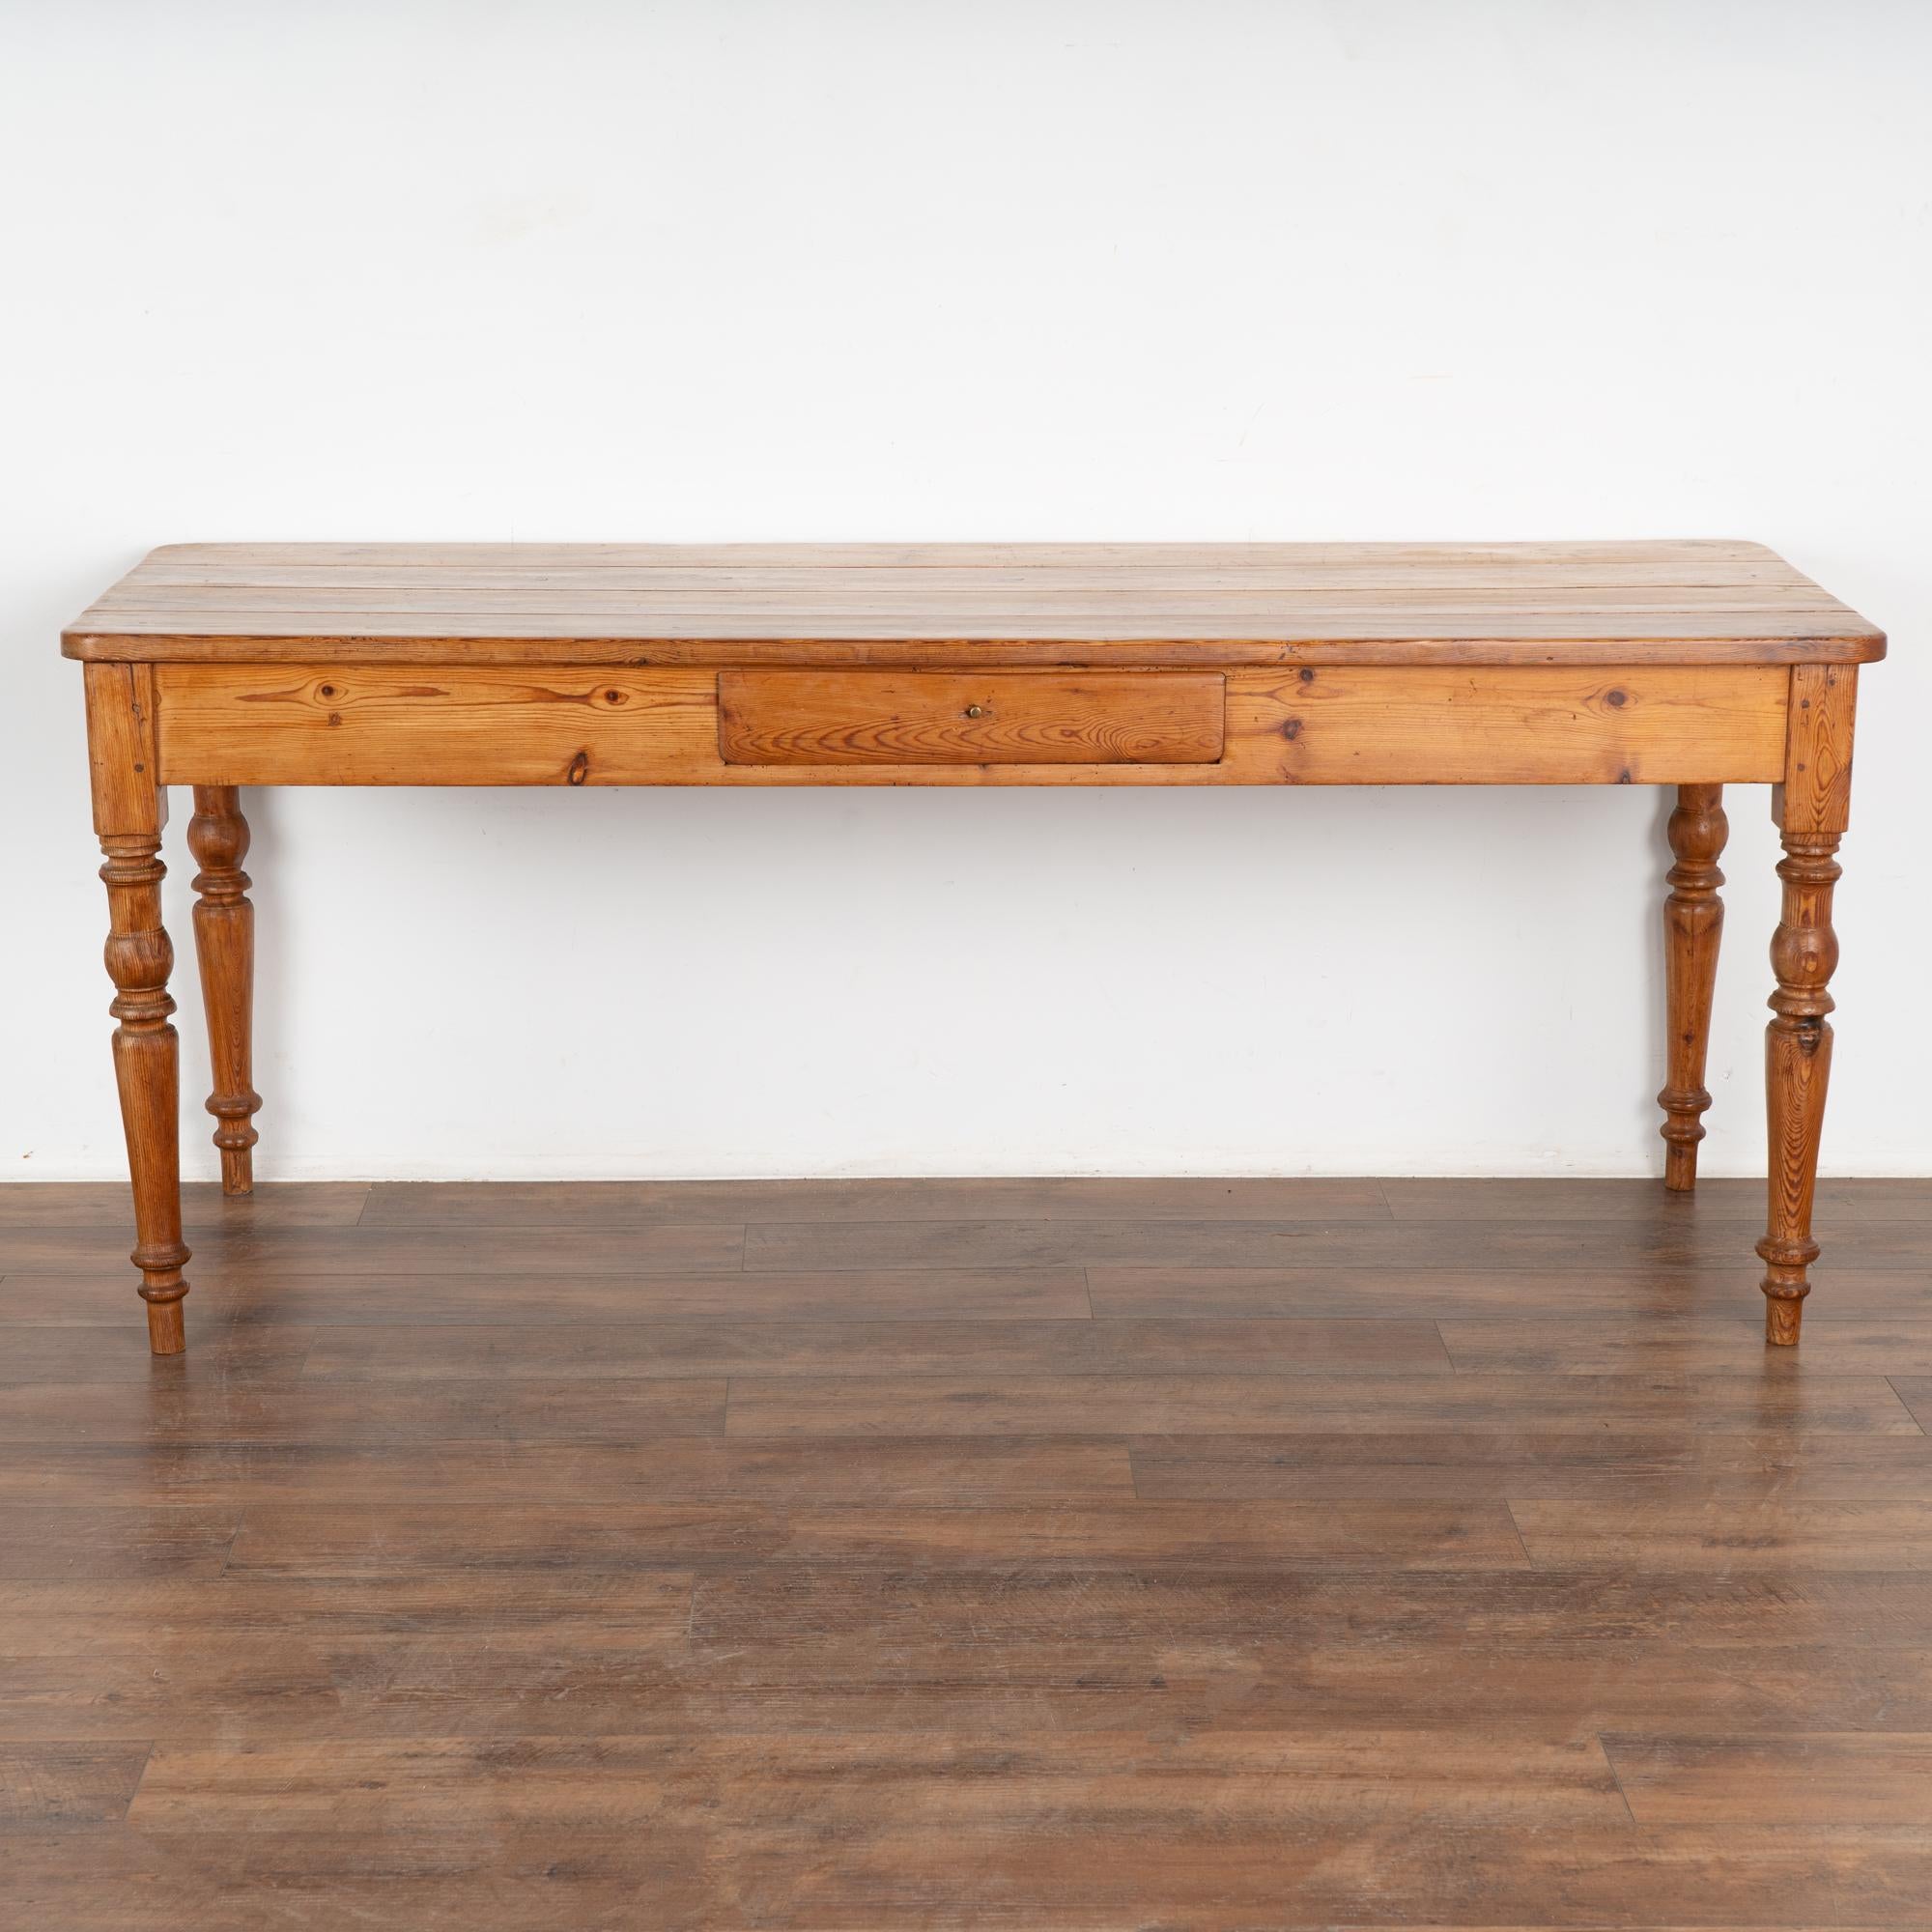 19th Century Pine Farm Table Console With Drawer, Denmark circa 1860